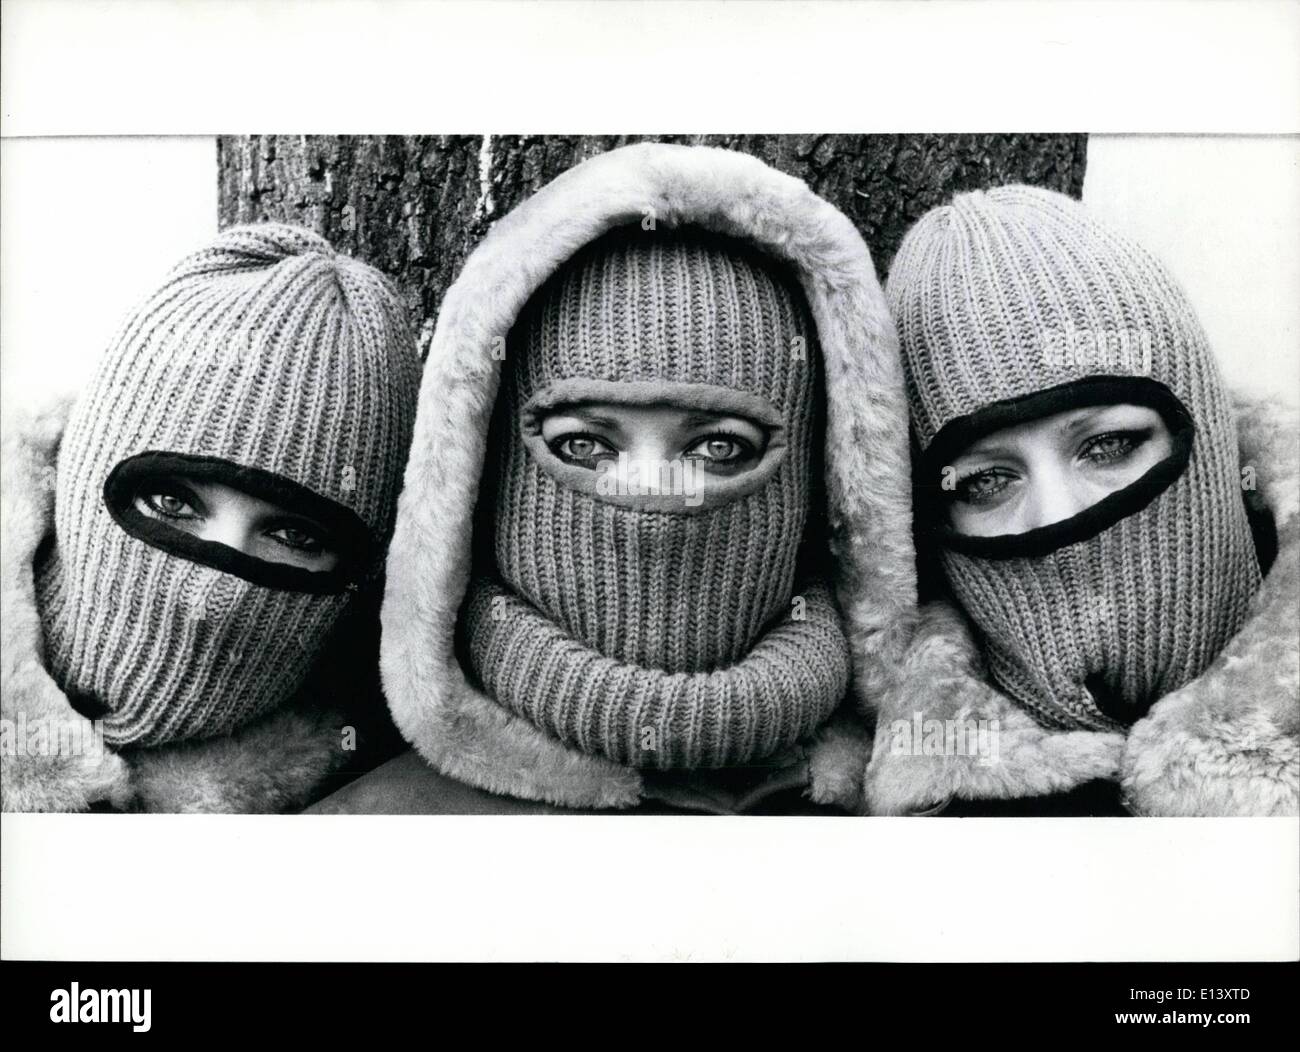 Mar. 27, 2012 - Hot, Hotter, Hottest! Demonstrating against the heat, which presently rules over Europe, are seen these three young ladies doing in an extraordinary way: with these very warm mask-like caps. Of course this knitting fashion is made for winter days, coming from Sweden, but who knows, summer might get frightened at this view, turning cold a little bit. Stock Photo